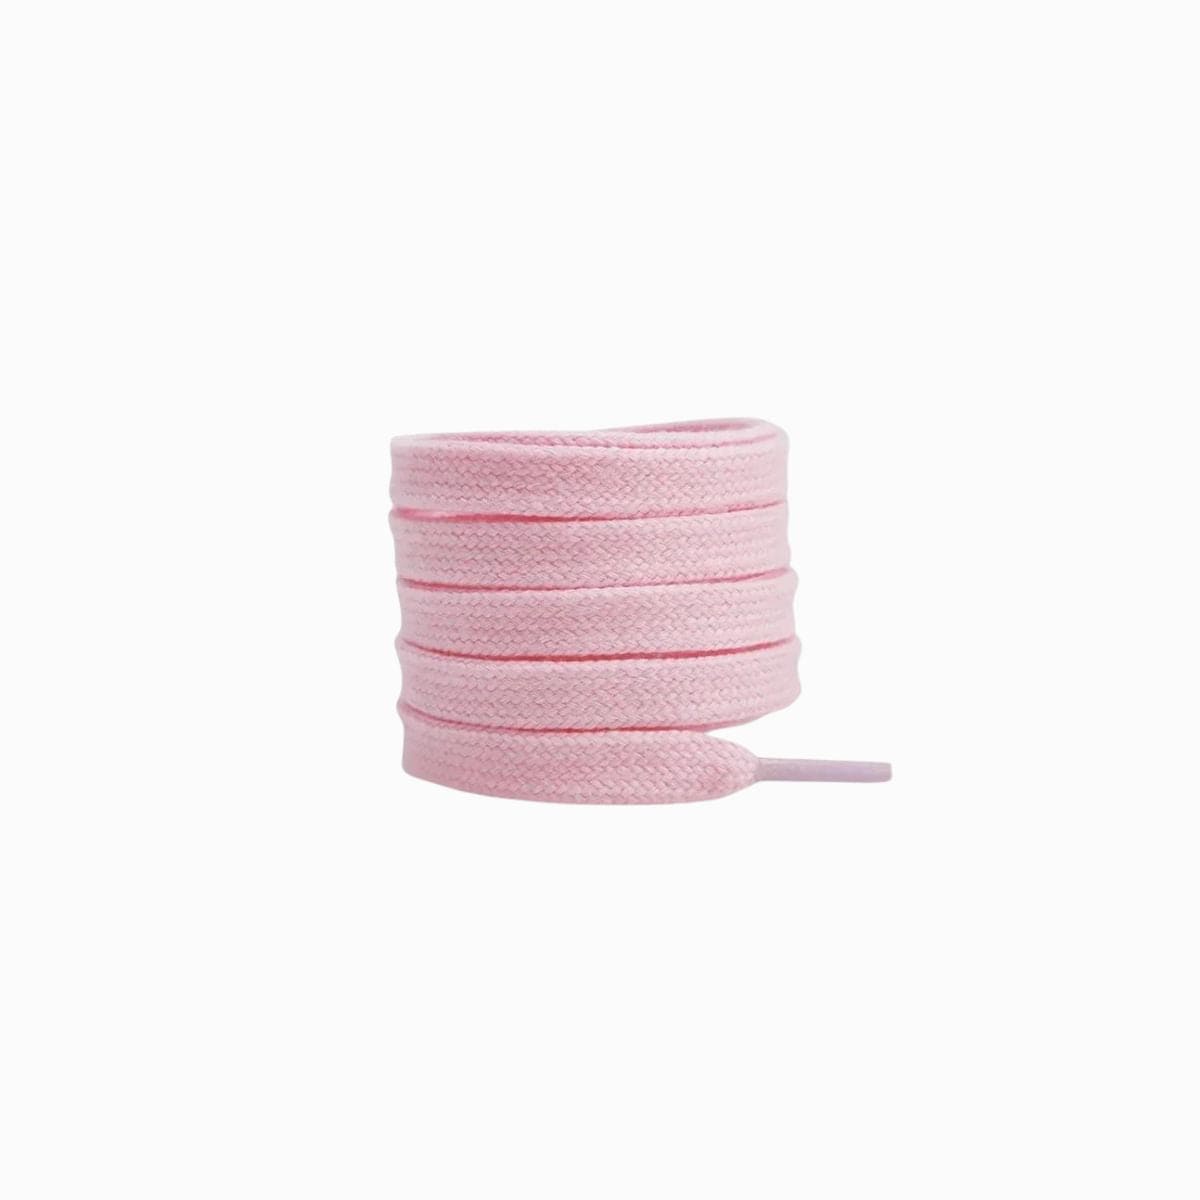 Light Pink Replacement Adidas Shoe Laces for Adidas Samba OG Sneakers by Kicks Shoelaces